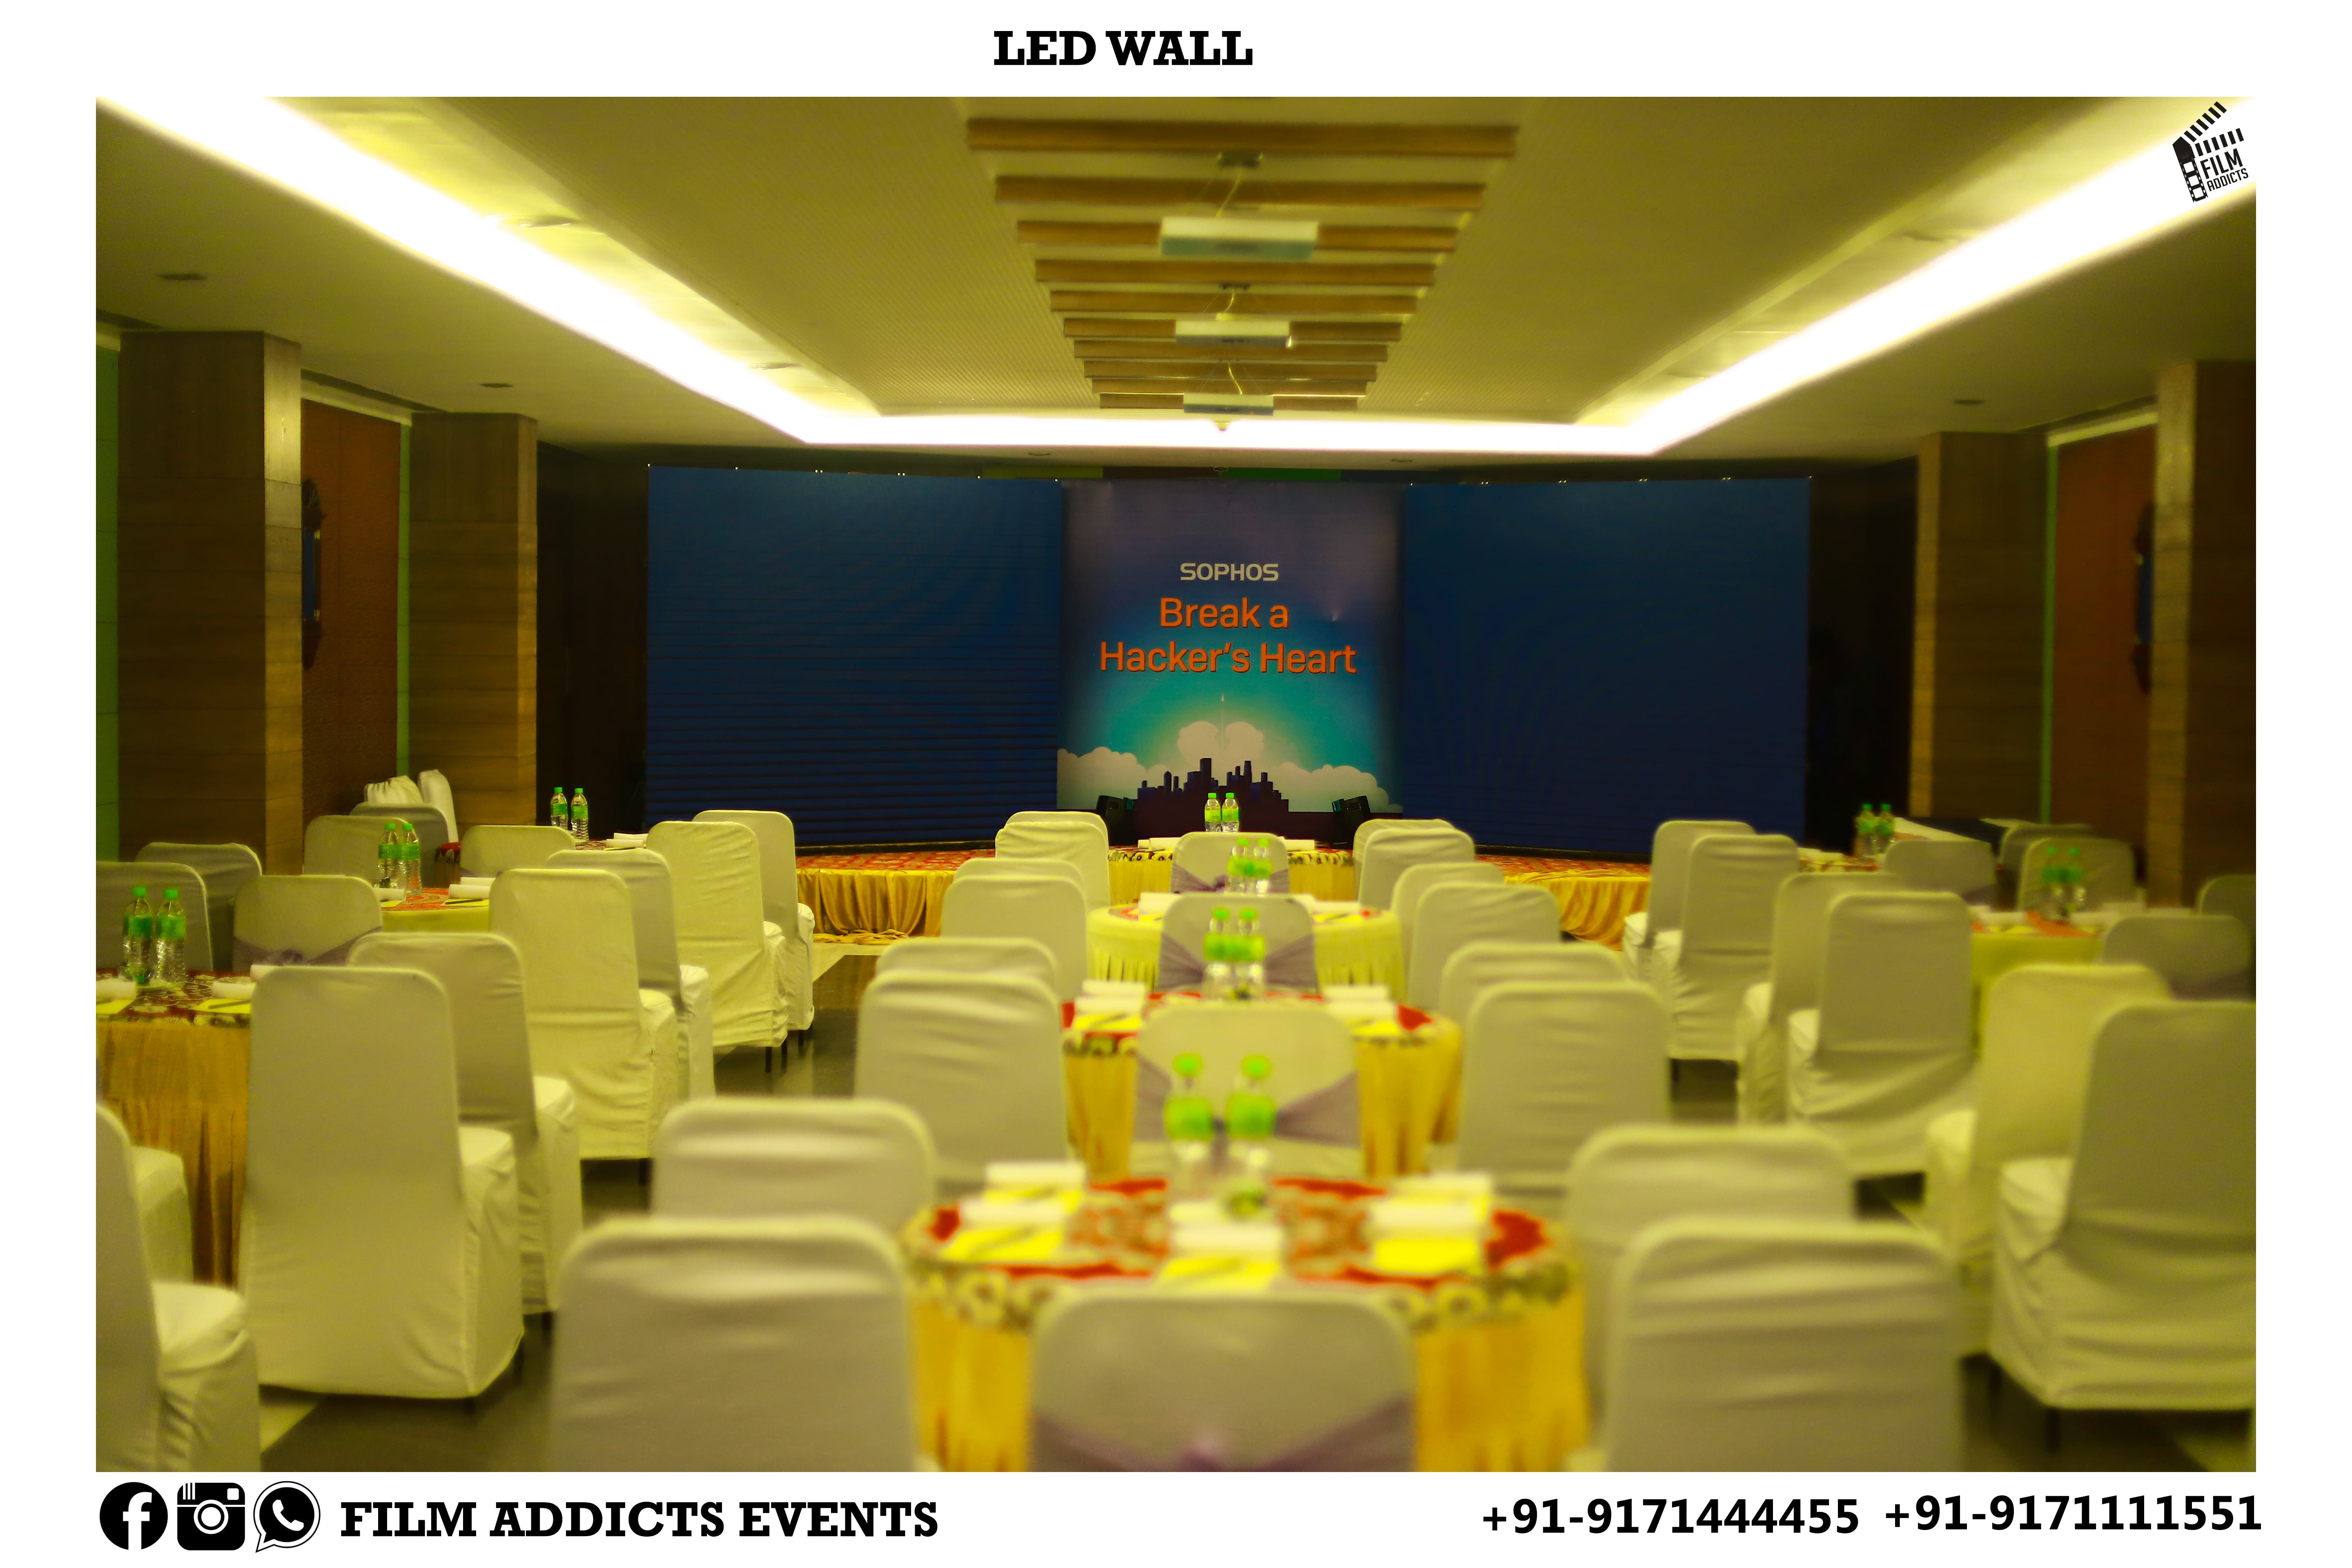 Best LED Video Wall Services in Madurai, Best LED Wall Services In Madurai ,Best LED Wall Rental Services In Madurai, Best Budget LED Wall Rental  Services in madurai, Best Wedding LED Wall Rentals In Madurai, Best clarity in led wall rentals in Madurai, Best cost-effective display rentals in Madurai, Best crisp, bright, high resolution led video services in Madurai, Best led wall rental services in Madurai, Best tailored lighting, vision and sound solutions led rentals in Madurai, Best outstanding new LED panels rental Service in Madurai, Best Indoor and Outdoor LED panels rental Service in Madurai, Best high resolution LED display rental Service in Madurai, Best Wedding LED wall rentals in Madurai, Best Grand wedding LED wall rentals in Madurai, Best LED wall rental Service in Madurai, Best LED Video Services in Madurai, Best Grand Wedding LED wall Renatls in madurai, Best LED wall Rentals for Grand Occasions in Madurai, Best Wedding LED Video Services in Madurai, Best Wedding LED video wall Rental Services in Madurai, Best LED Video Wall Rentals for Grand Occassions in Madurai, Best LED Video Wall Rentals for events in Madurai, Best LED video Services for live events in Madurai, Best video wall rentals for Live events in Madurai, Best LED Video Wall Rentals for Live events in Madurai, Best LED Video Wall On Hire in Madurai, Best LED Video Wall Services in Madurai, Best LED Video Wall Service Systems in Madurai, Best LED Wall Washer Light Services in Madurai, Best LED Wall Light Services in Madurai, Best LED Wall Mount Bracket Services in Madurai.